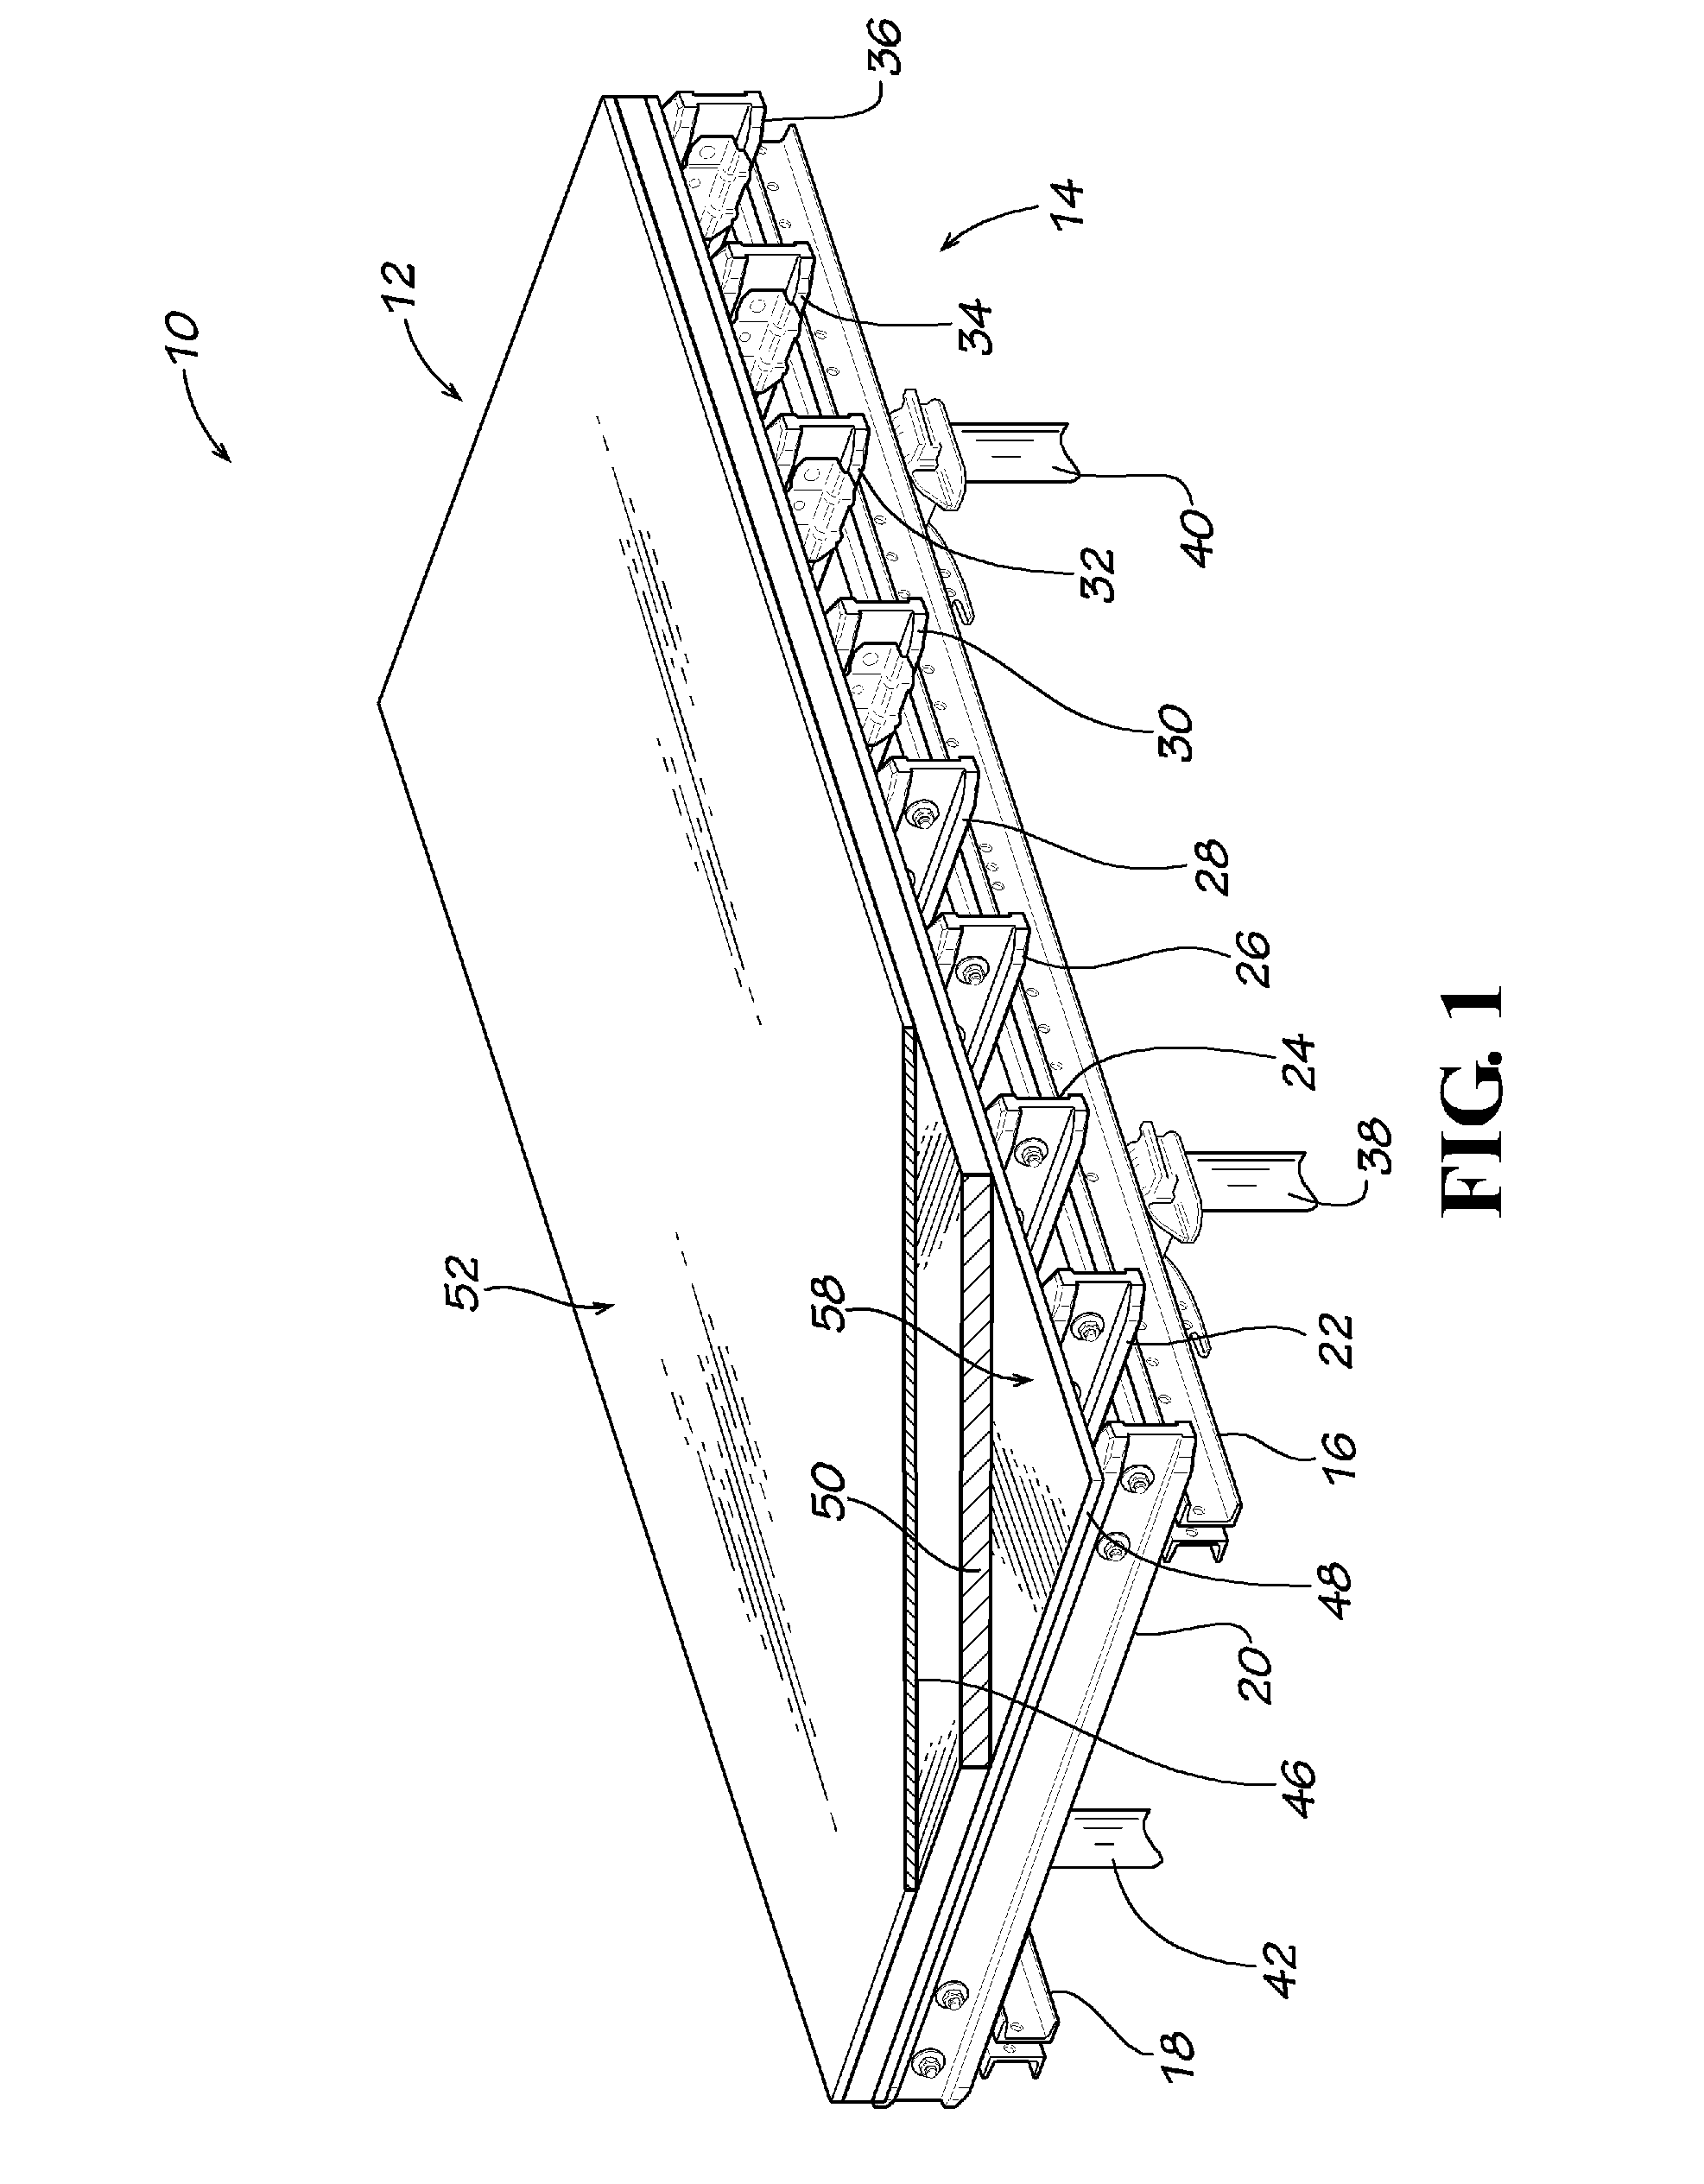 Insulated flying table concrete form, electrically heated flying table concrete form and method of accelerating concrete curing using same